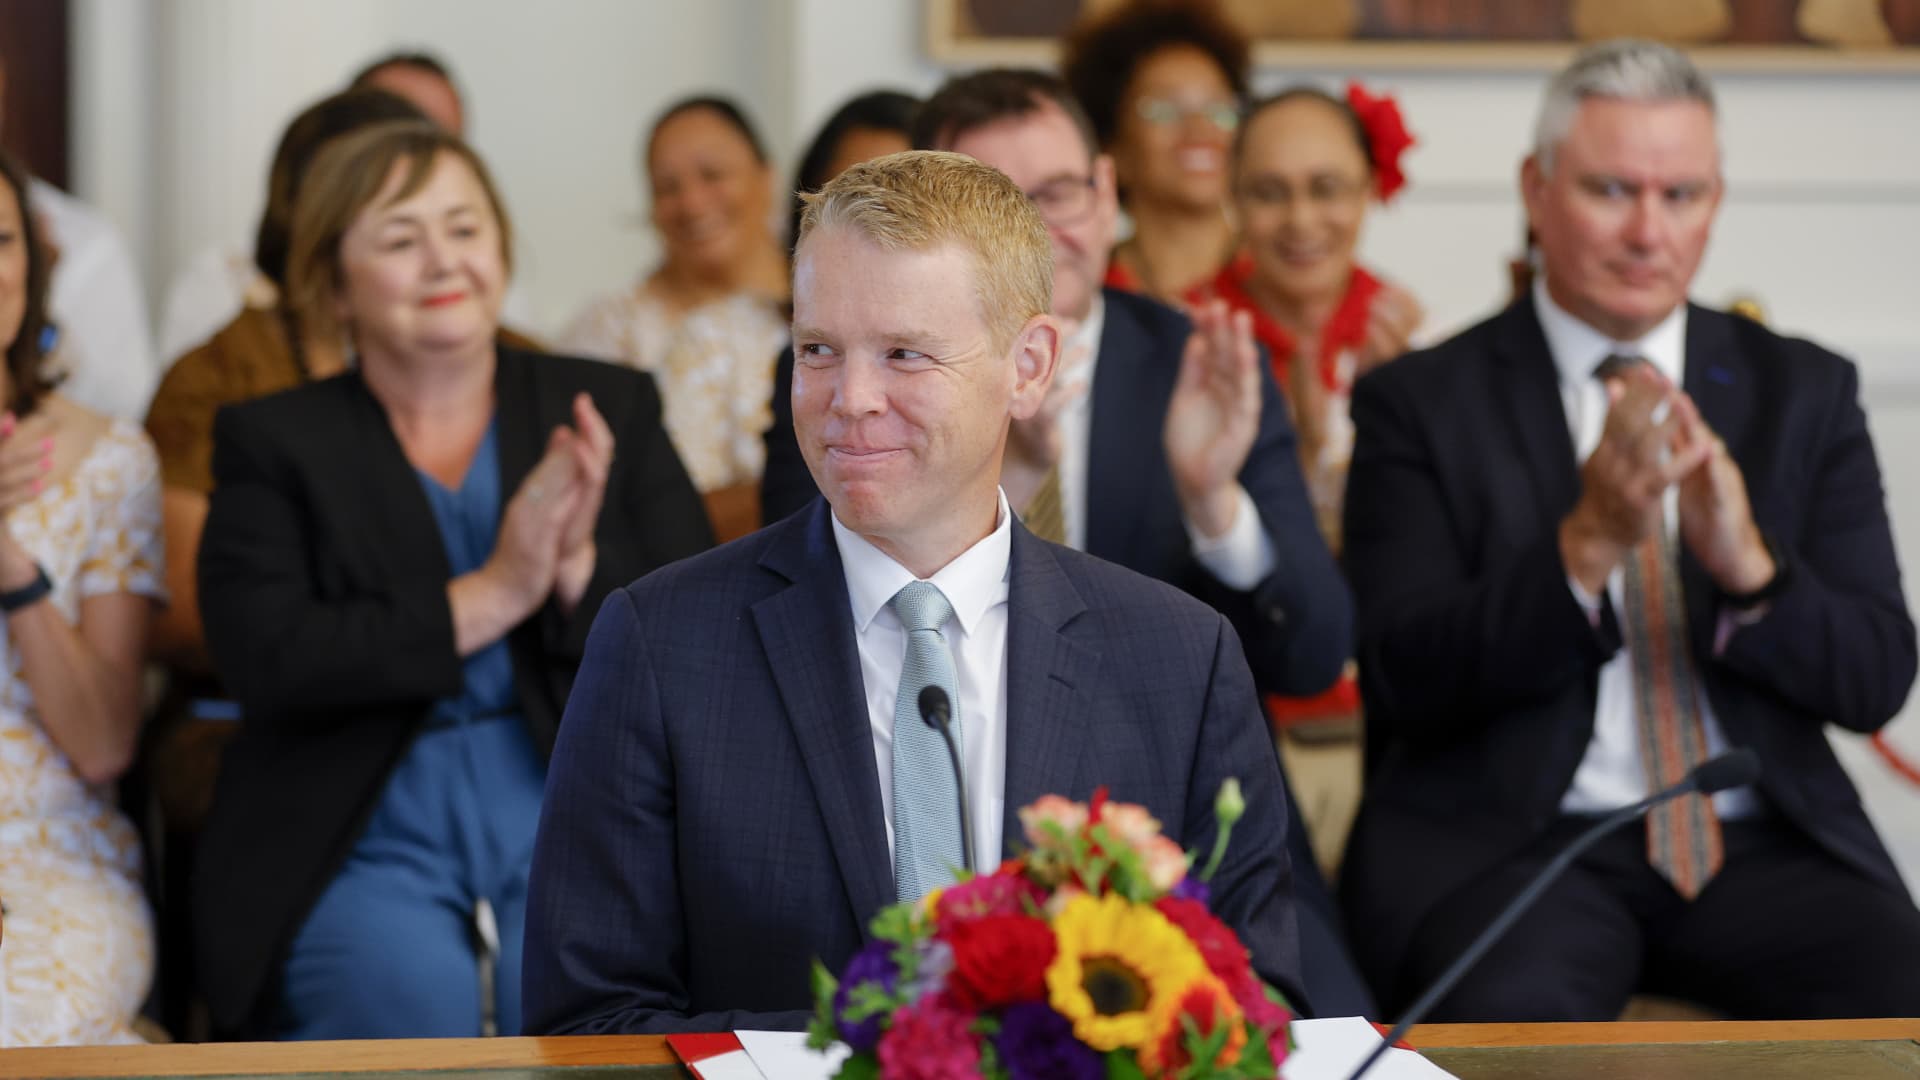 Chris Hipkins becomes New Zealand’s 41st prime minister